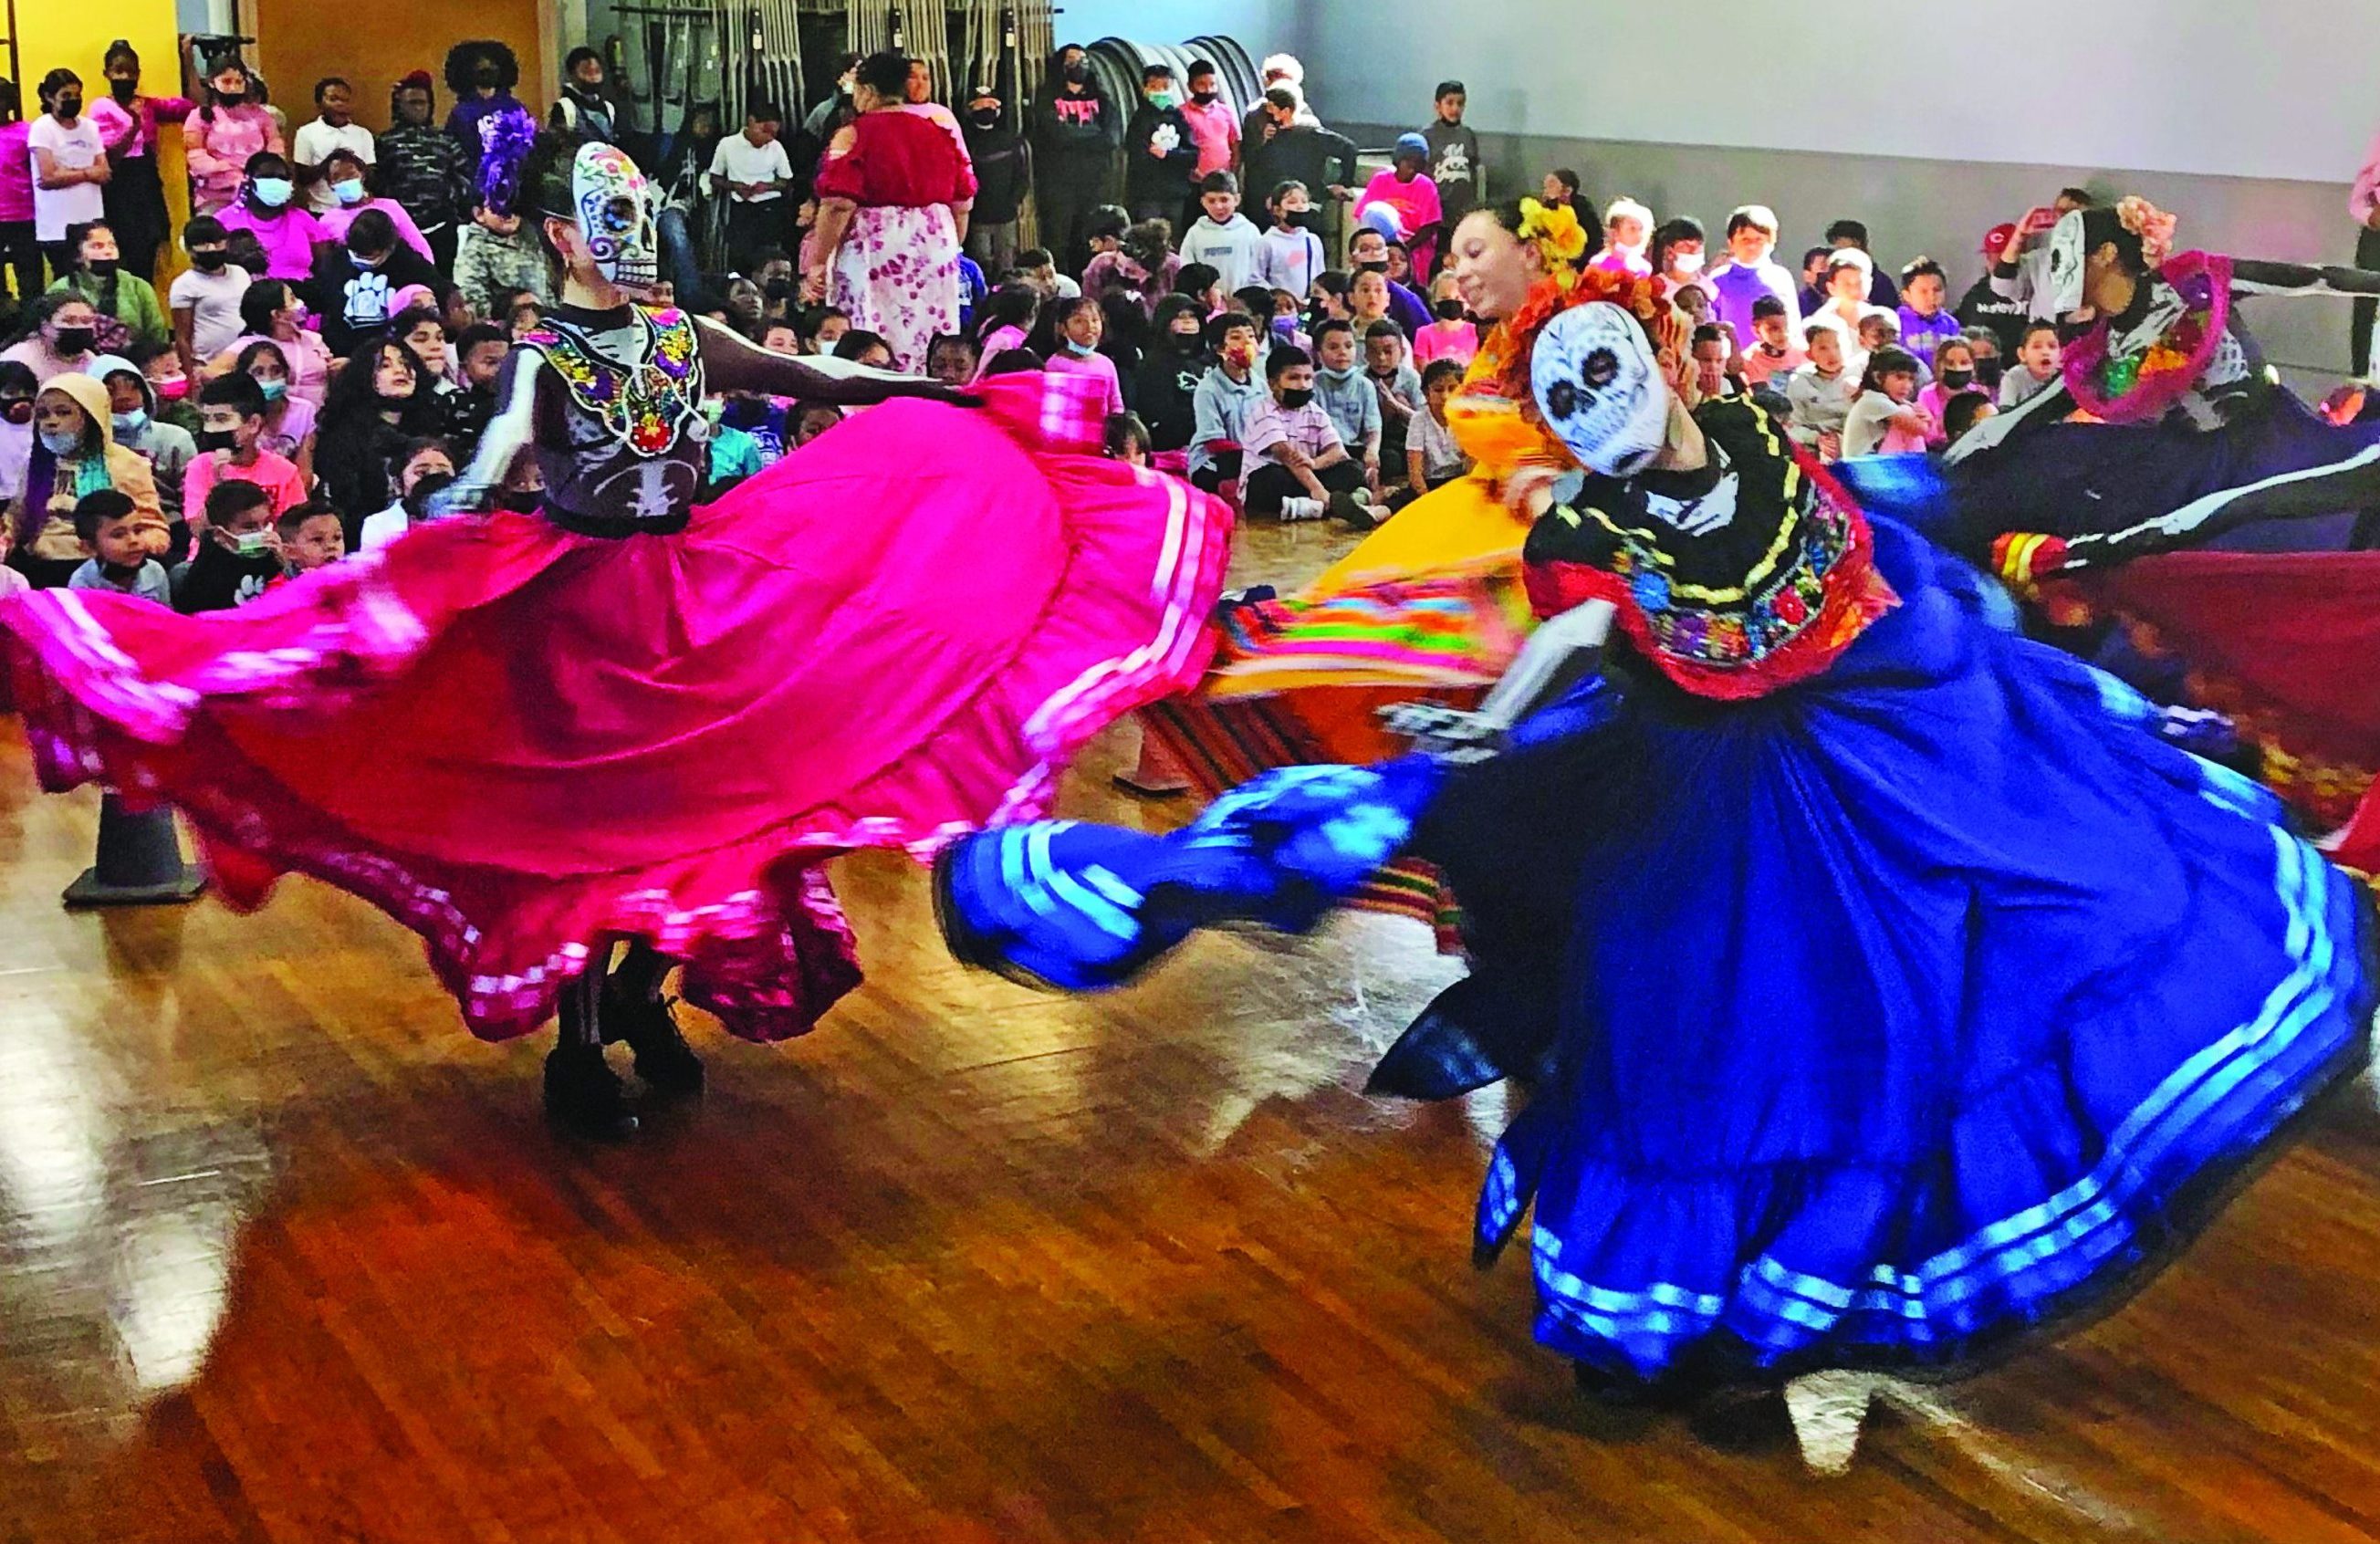 Female dancers, wearing masks decorated as skulls, turn about the room in colorful, full skirts as students watch.